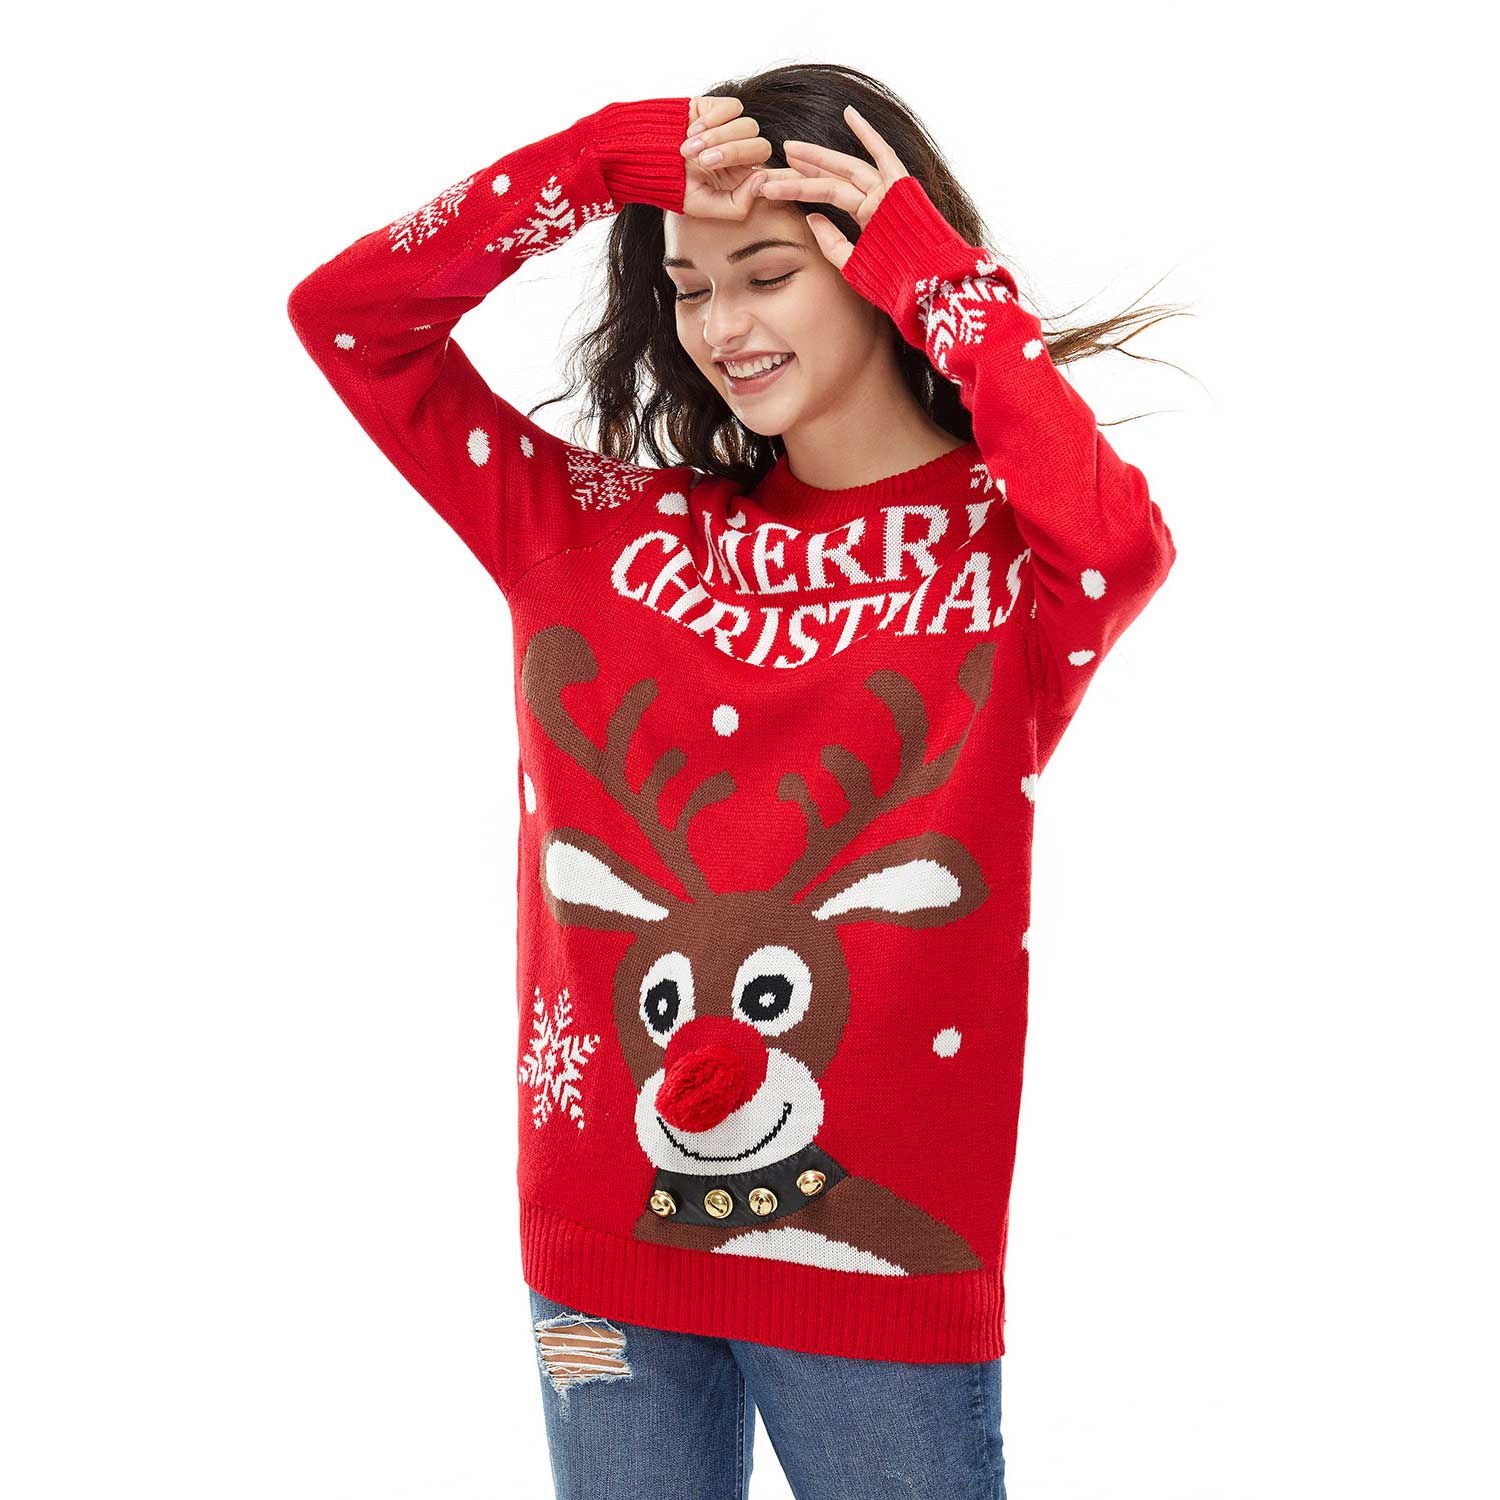 Jingle Bells Rudolph Couples Funny Ugly Christmas Sweater